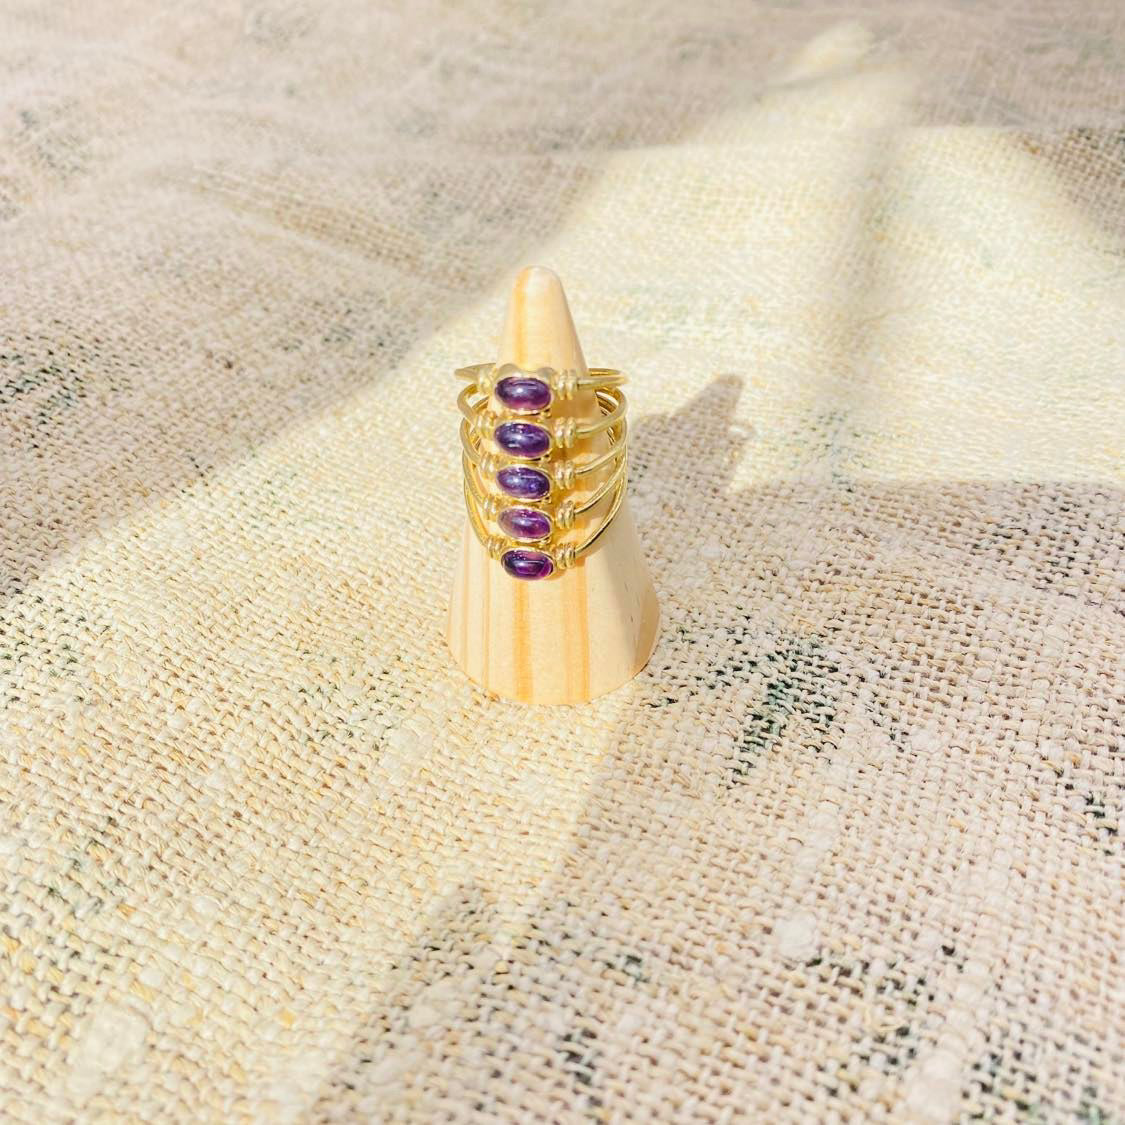 Chunky Crystal Rings, Handmade Gold Filled Stackable Rings, Multi Layer Vintage Rings, Bohemian Jewelry, Gift For Her, Non Tarnish Rings